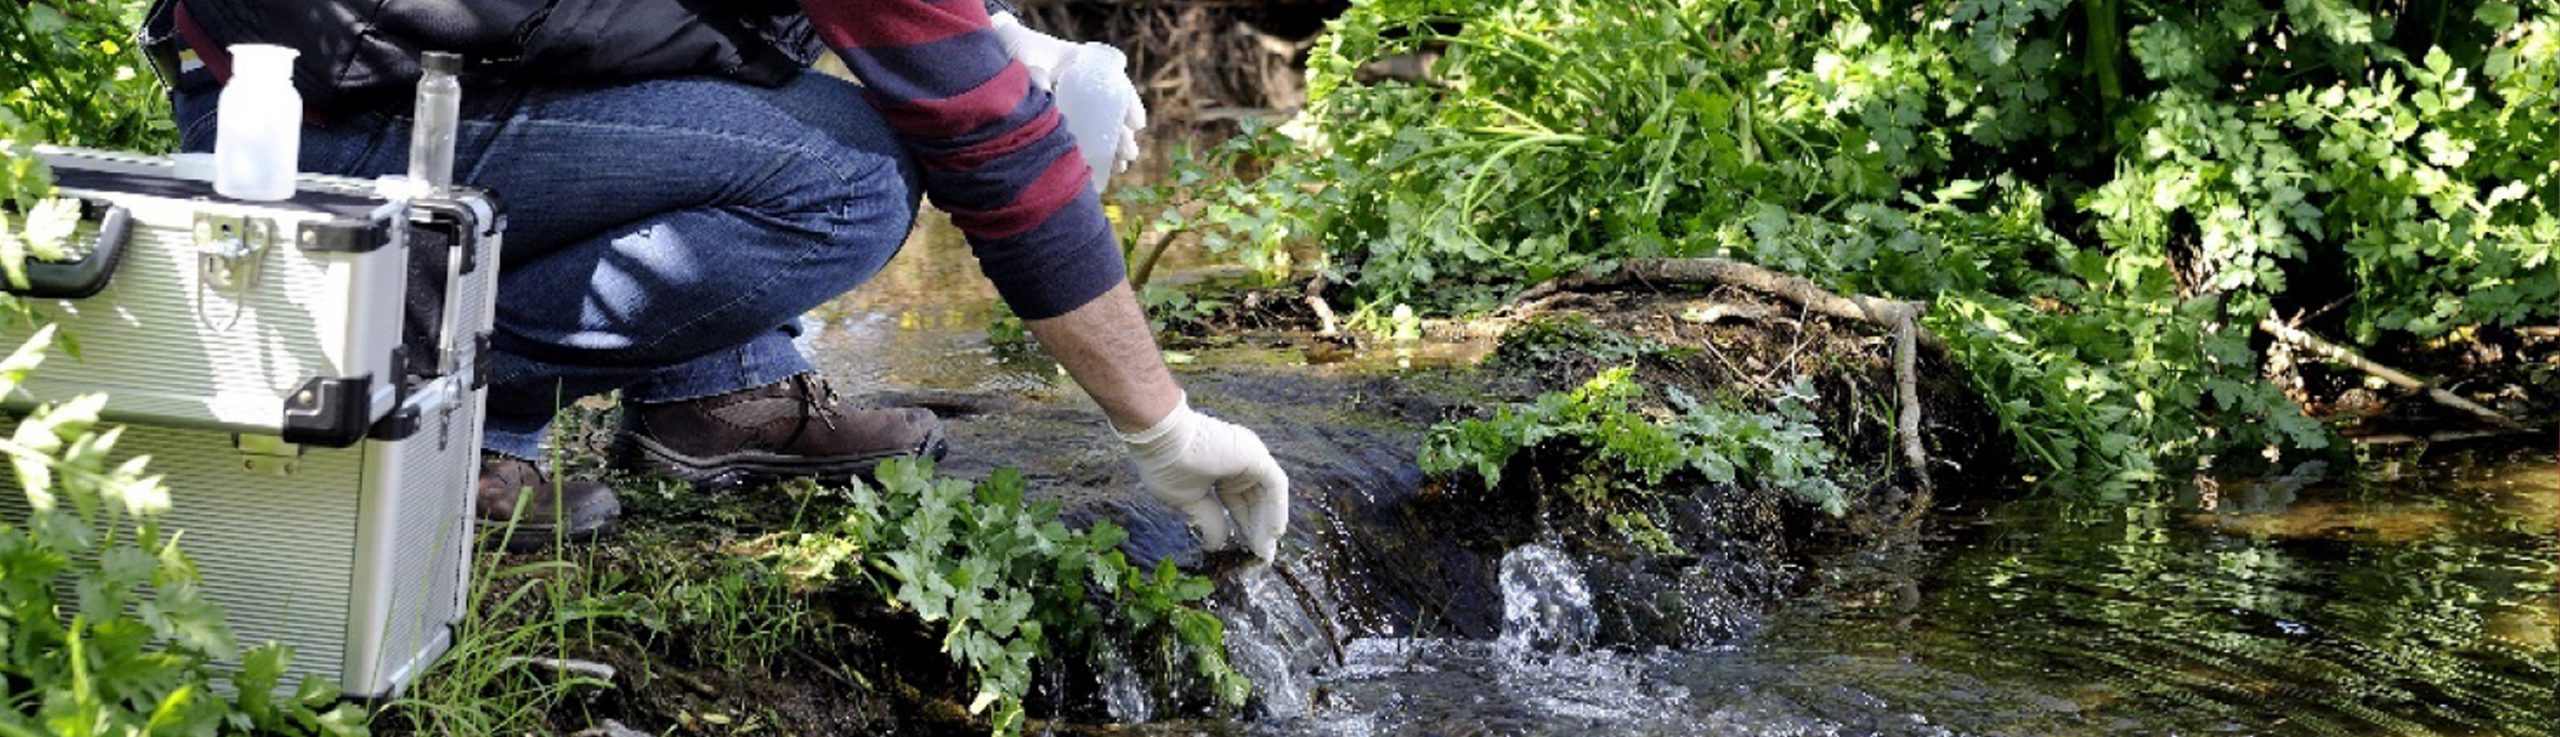 A person with gloves on bending over and collecting a water sample from a stream